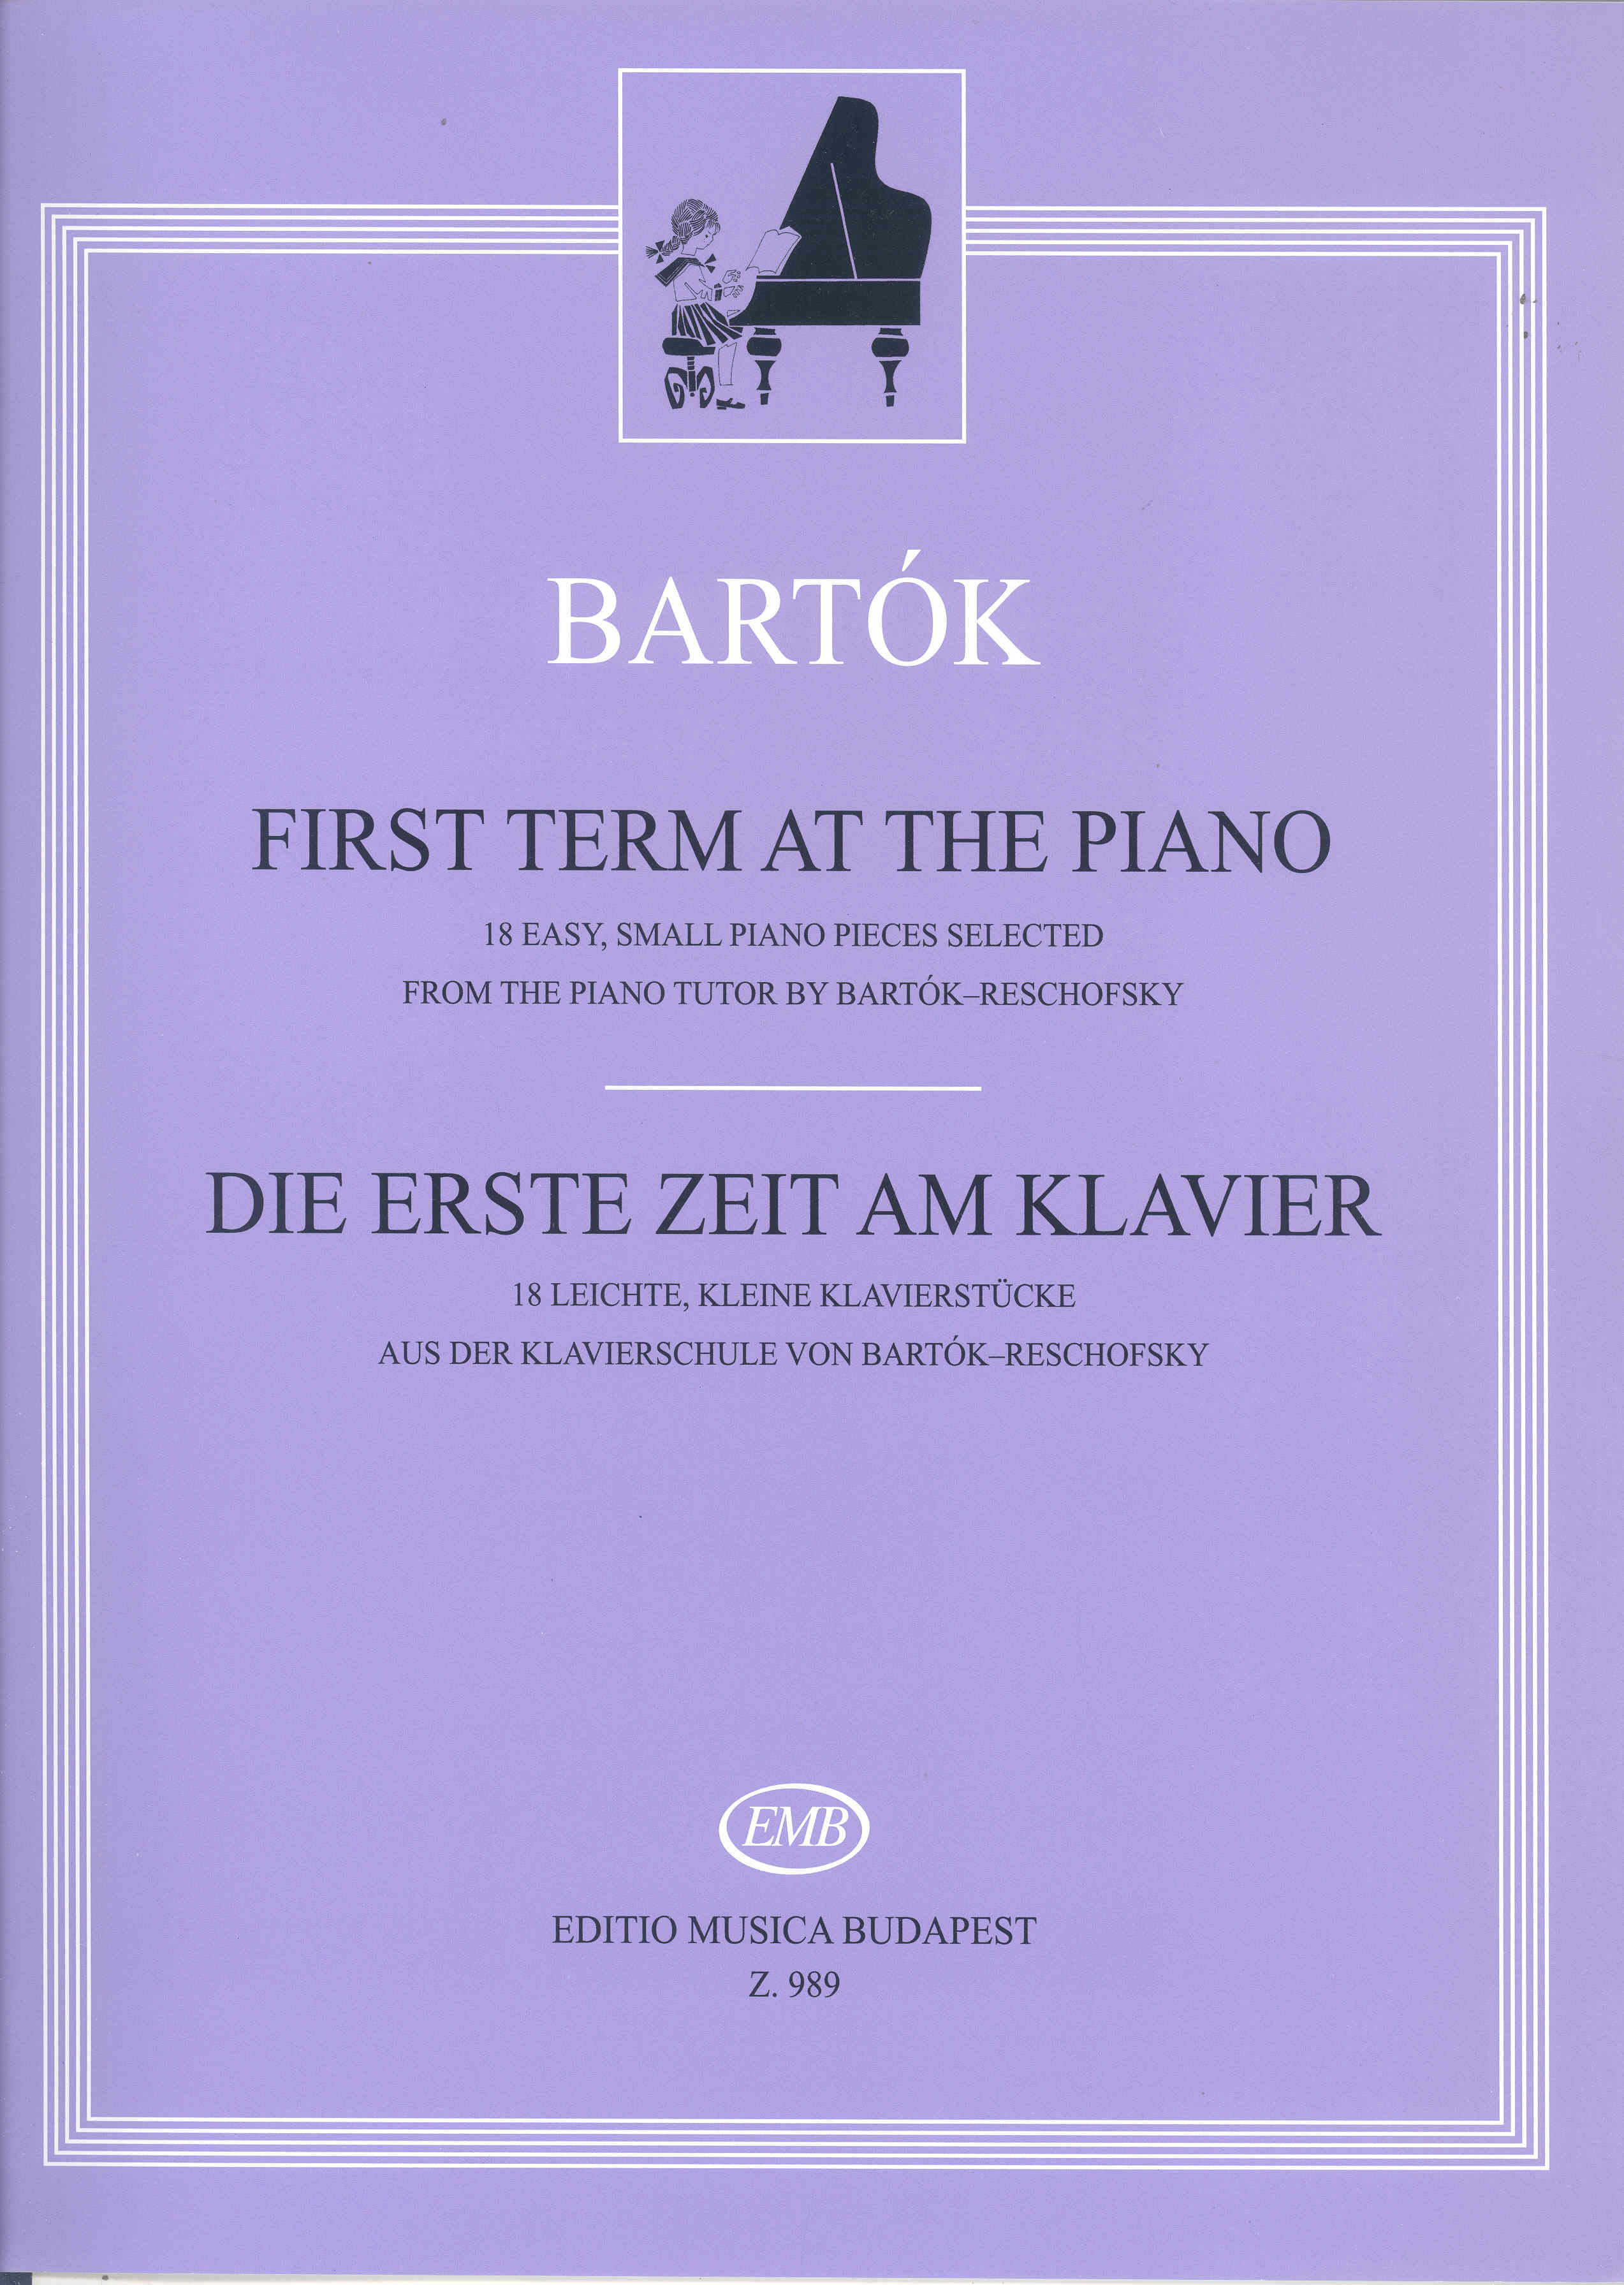 Bartok First Term At The Piano Piano Sheet Music Songbook